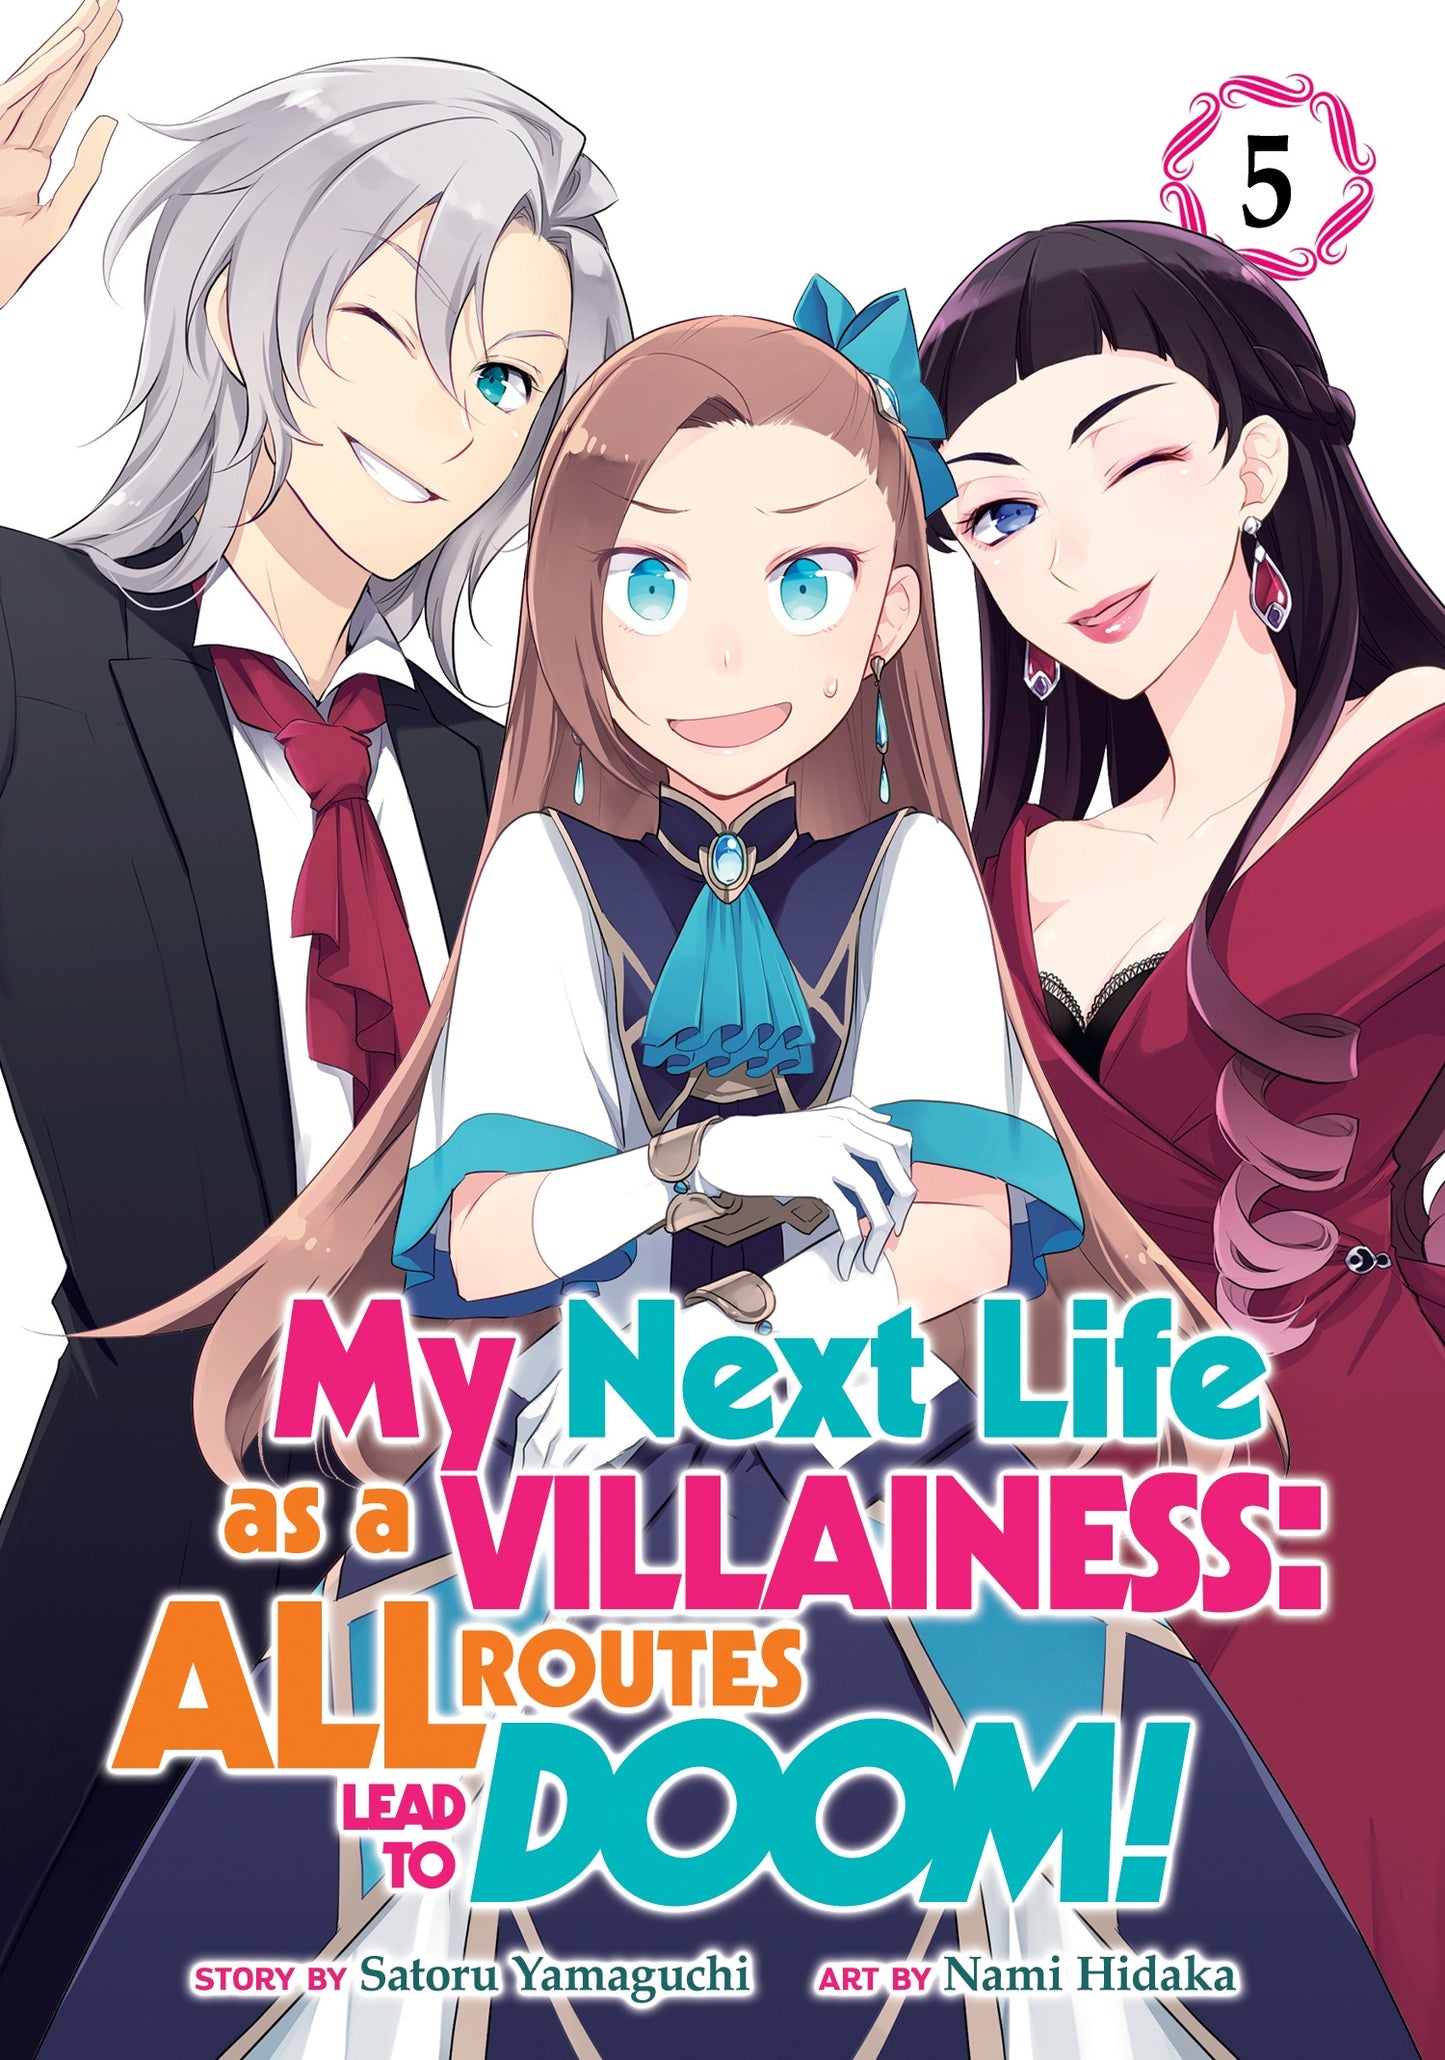 My Next Life as a Villainess : All Routes Lead to Doom! (Manga) Vol. 5 - Manga Warehouse